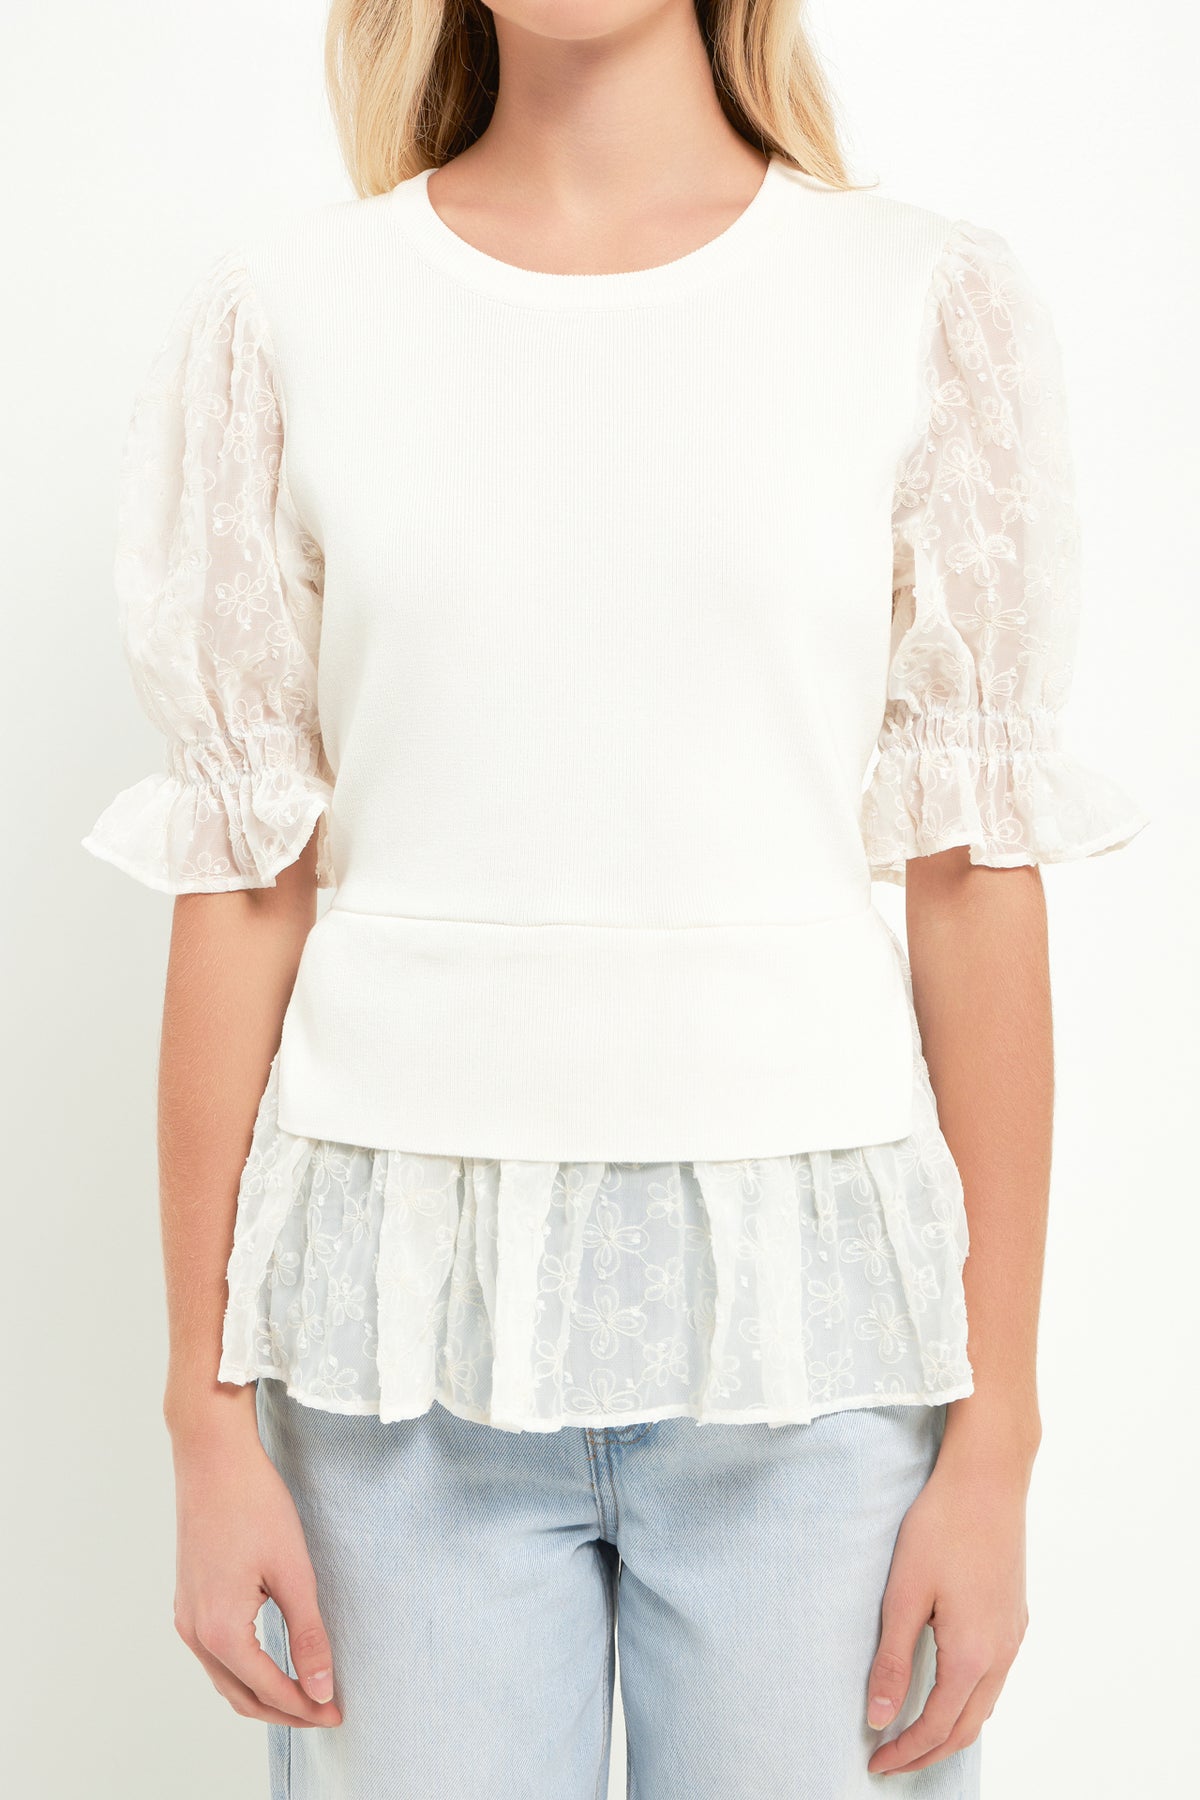 ENGLISH FACTORY - Textured Mixed Media Top - TOPS available at Objectrare